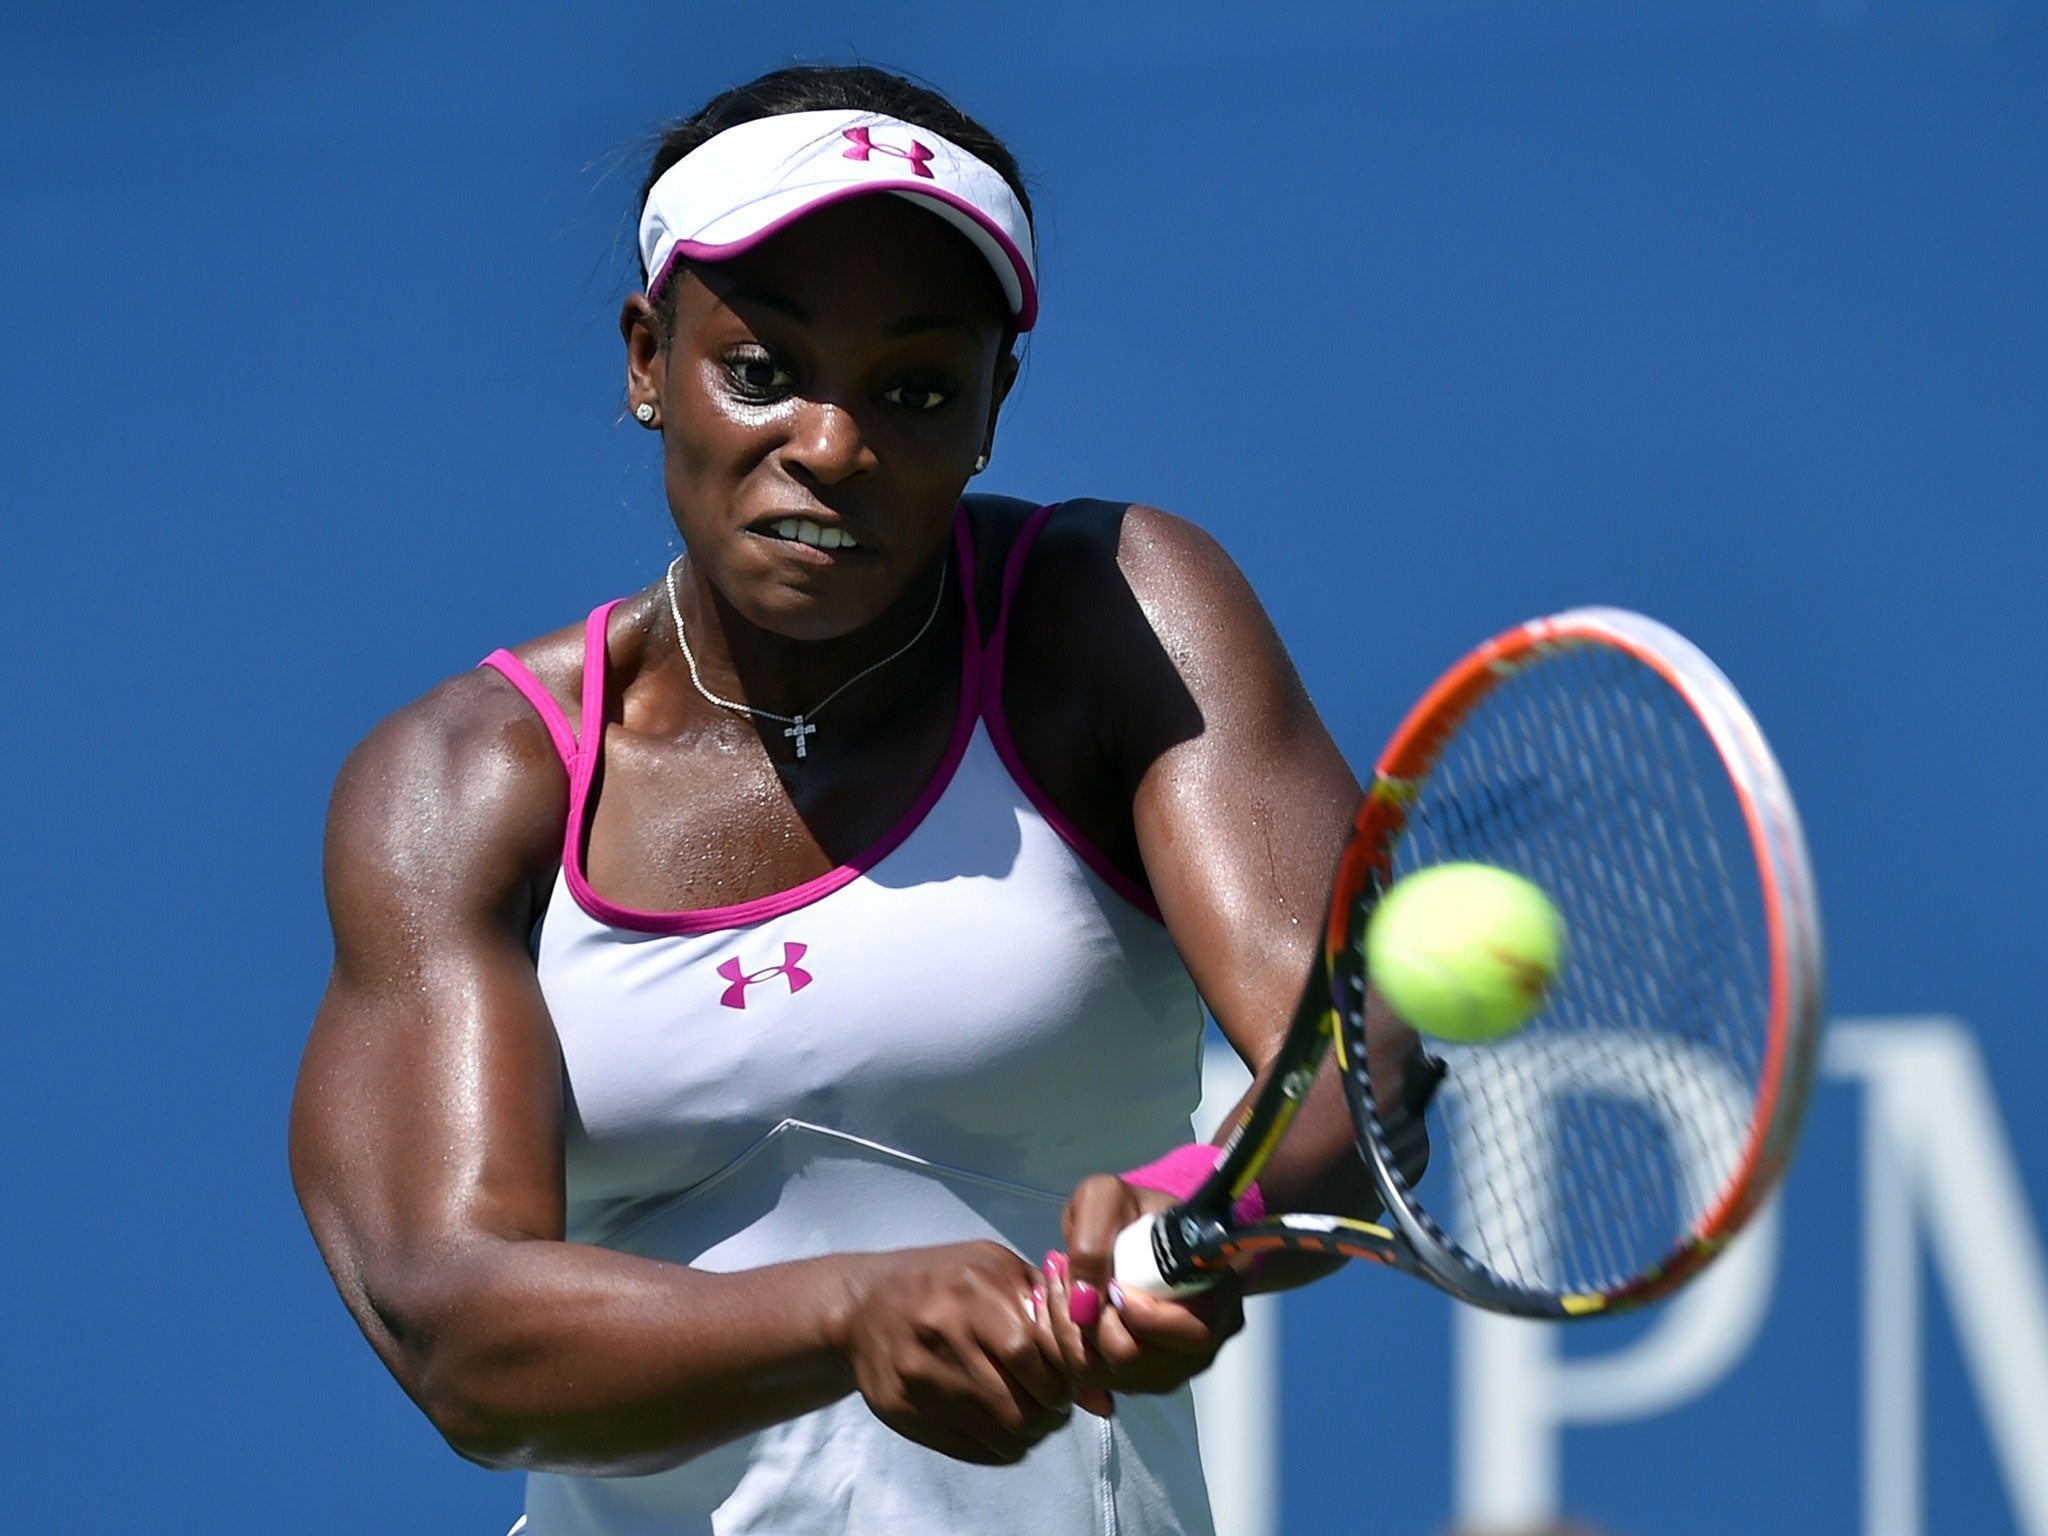 US Open Sloane Stephens crashes out after defeat to world no 96 Johanna Larsson The Independent The Independent